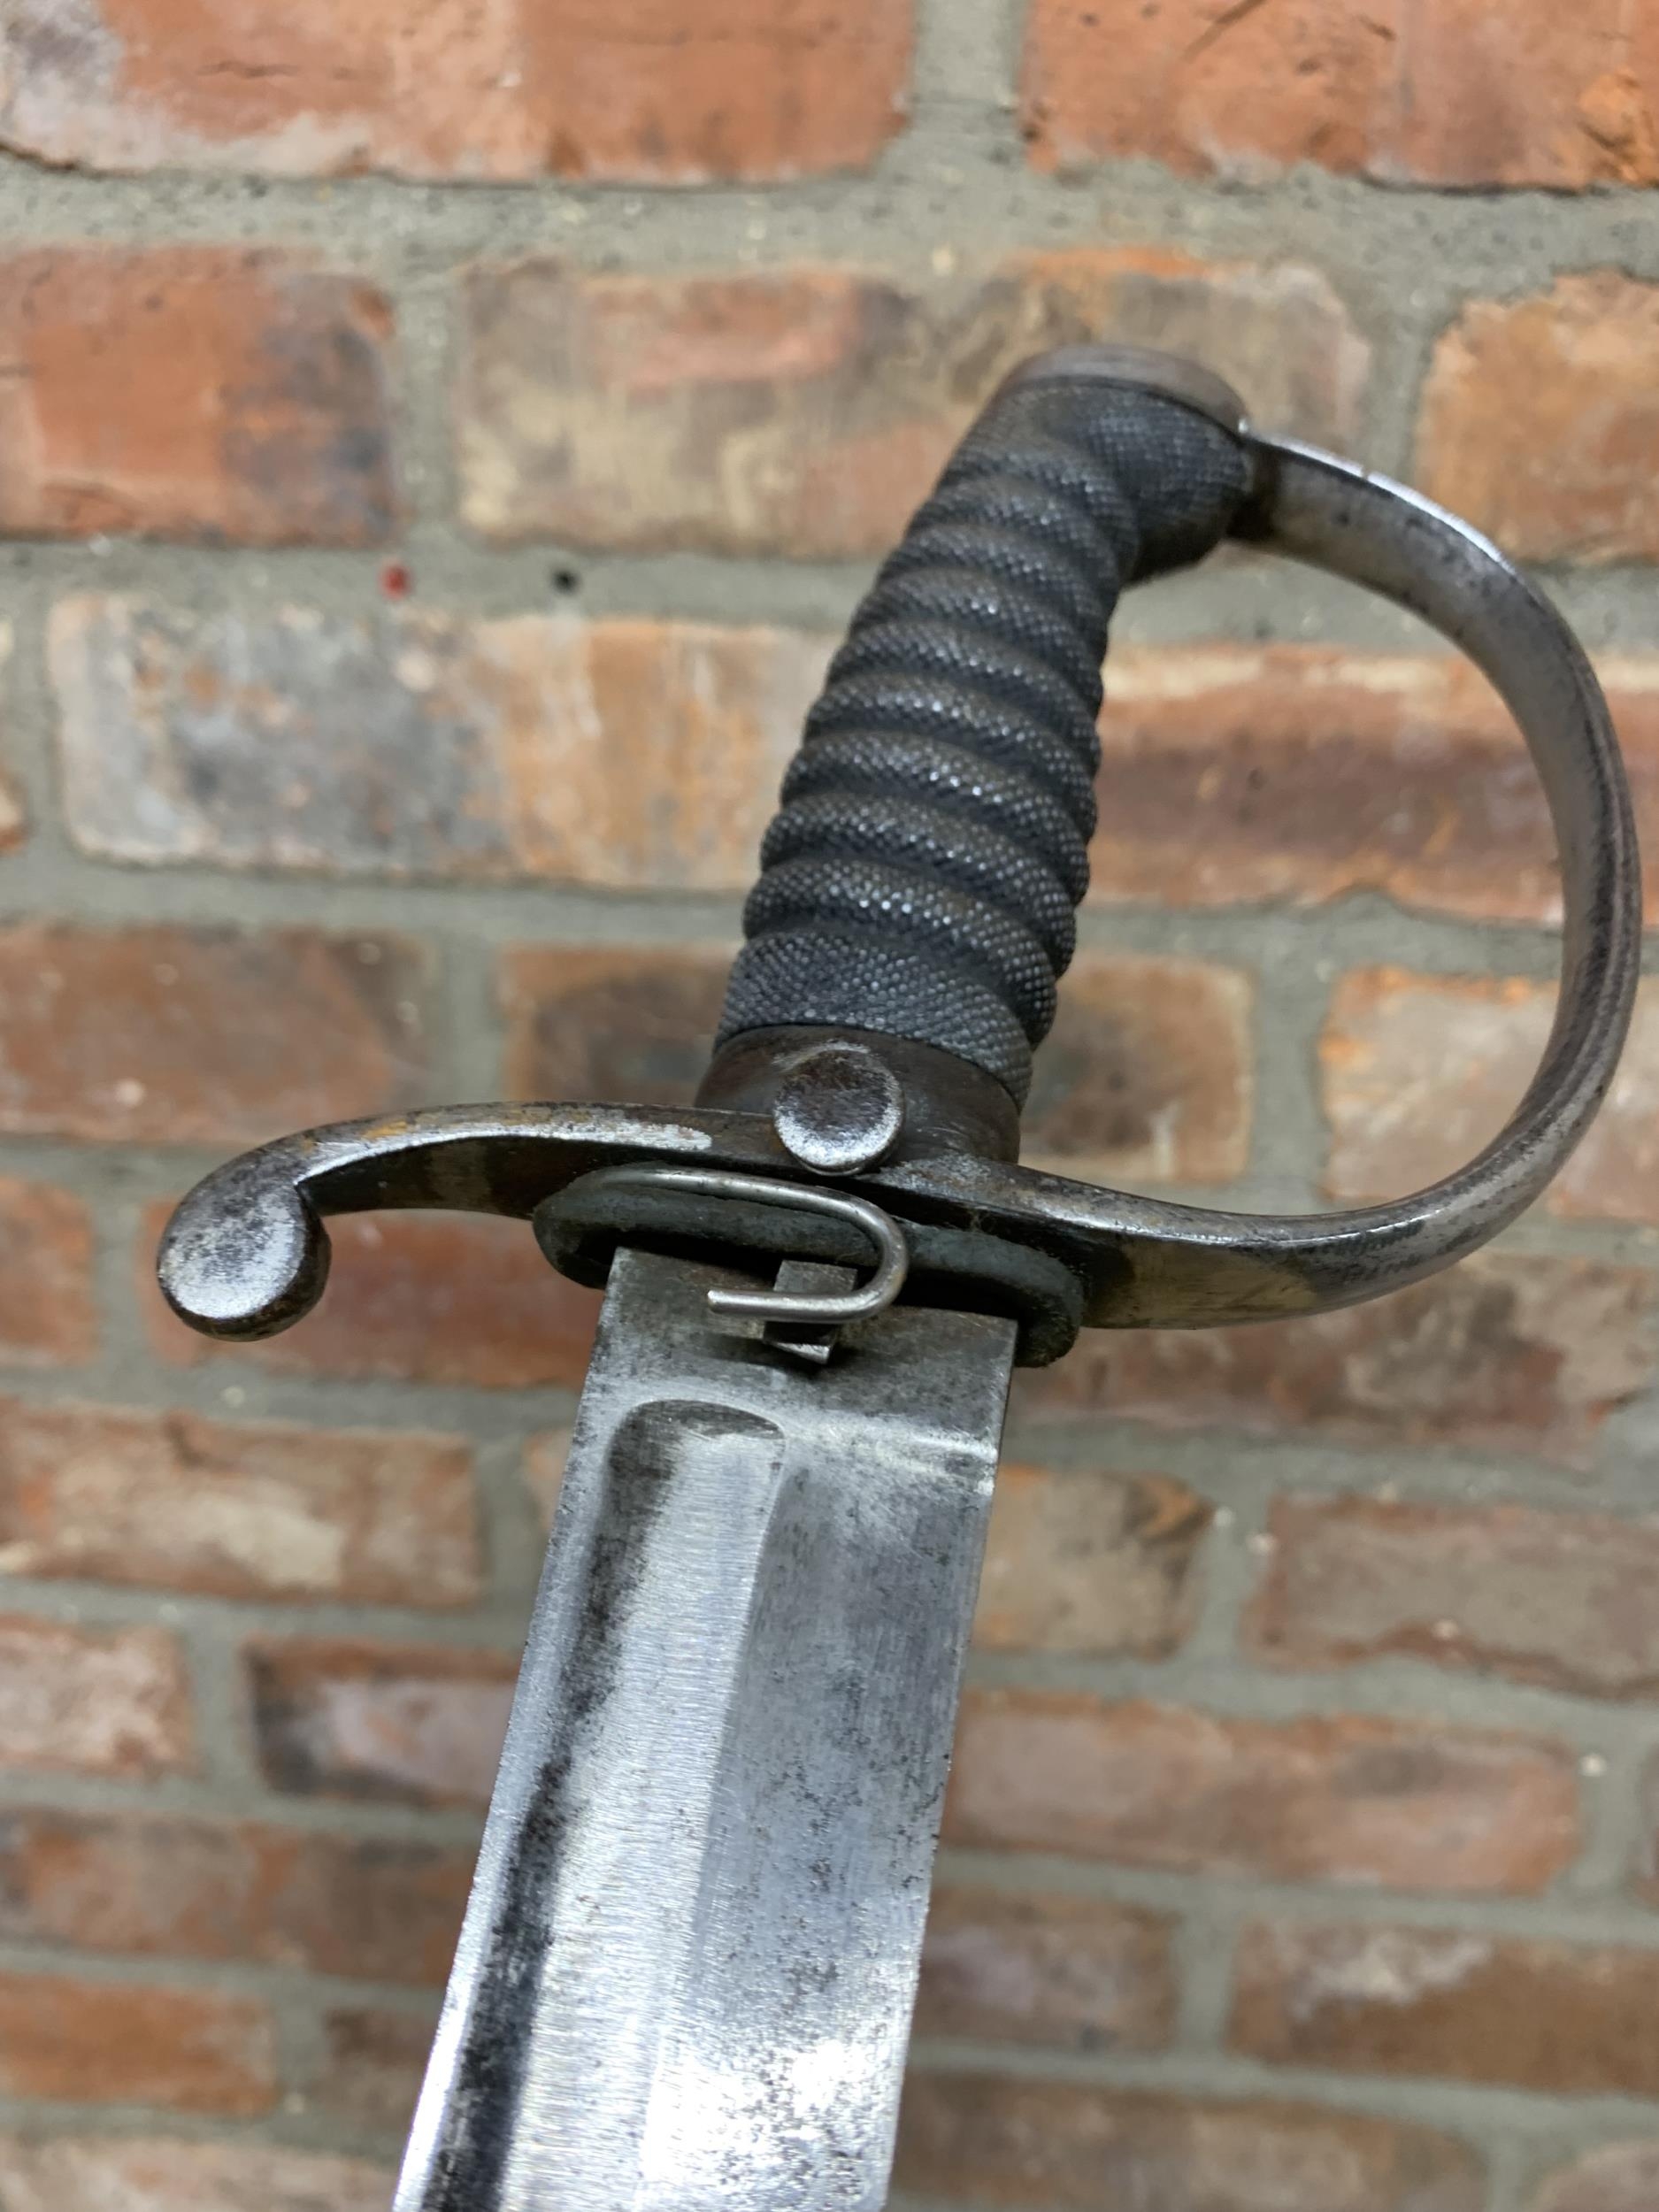 Victorian Constabulary / Prison Wardens short sword with curved fullered blade and shagreen grip, - Image 2 of 2